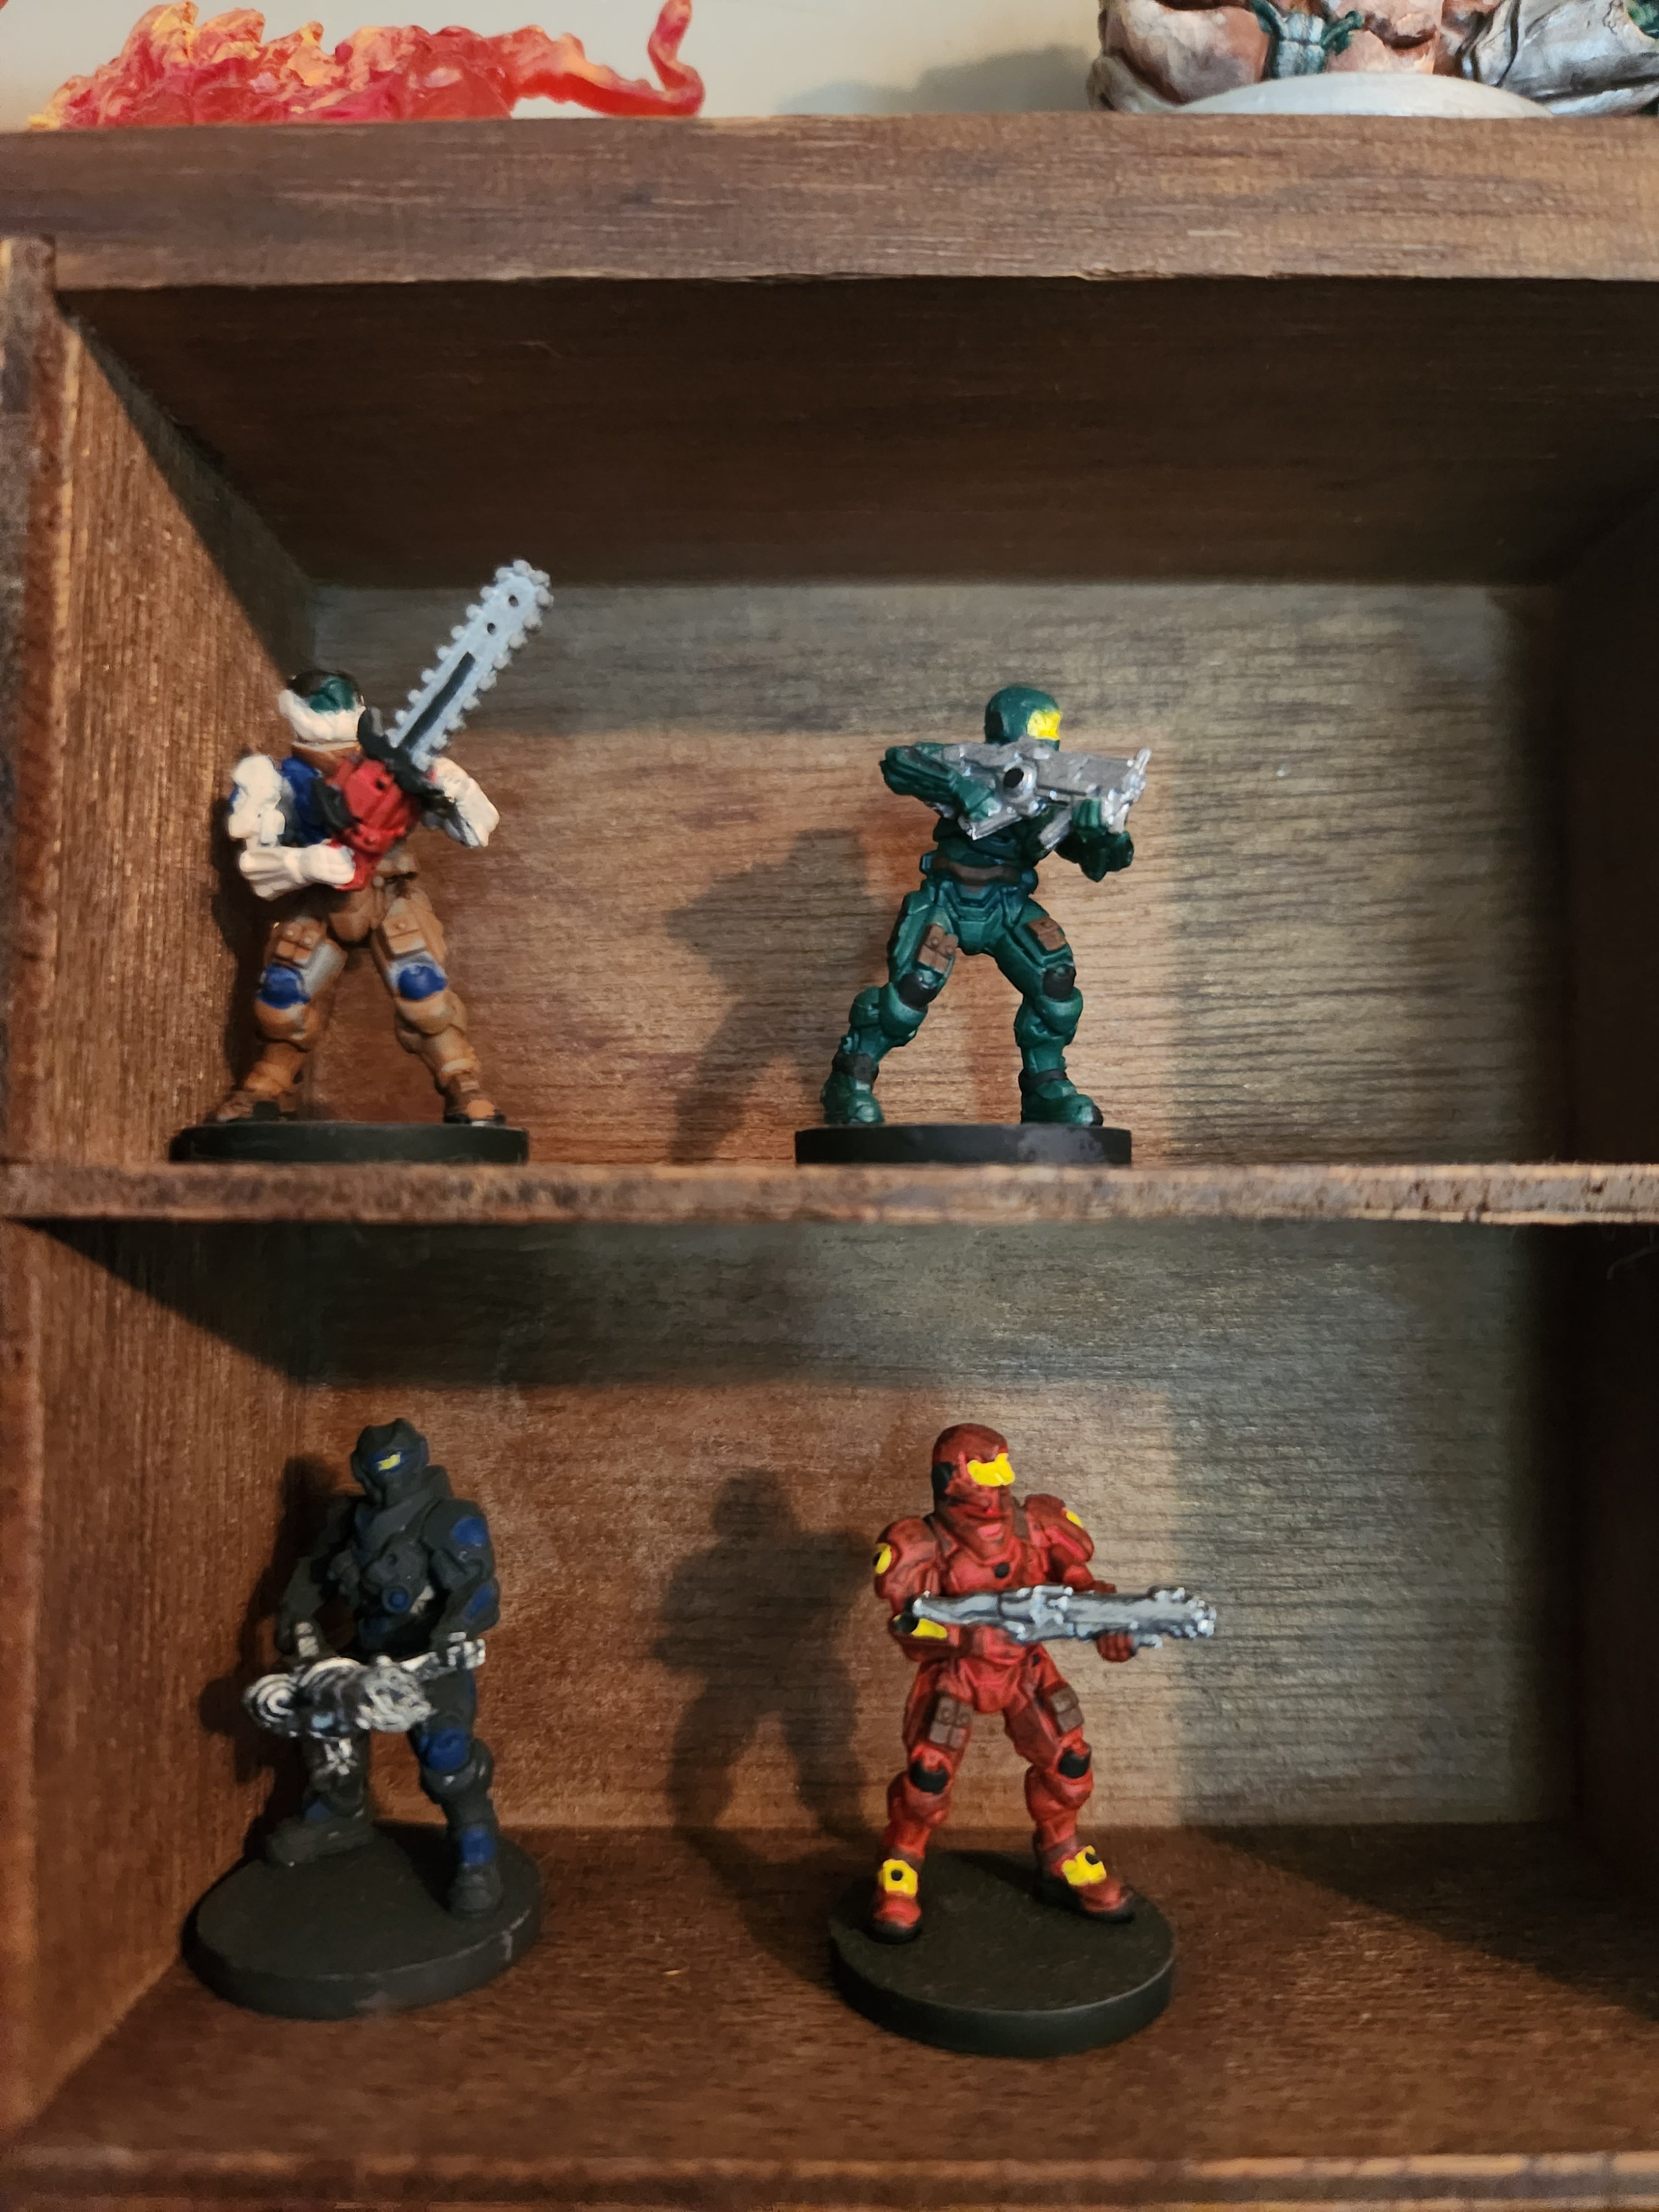 Picture of painted miniatures from the Doom boardgame